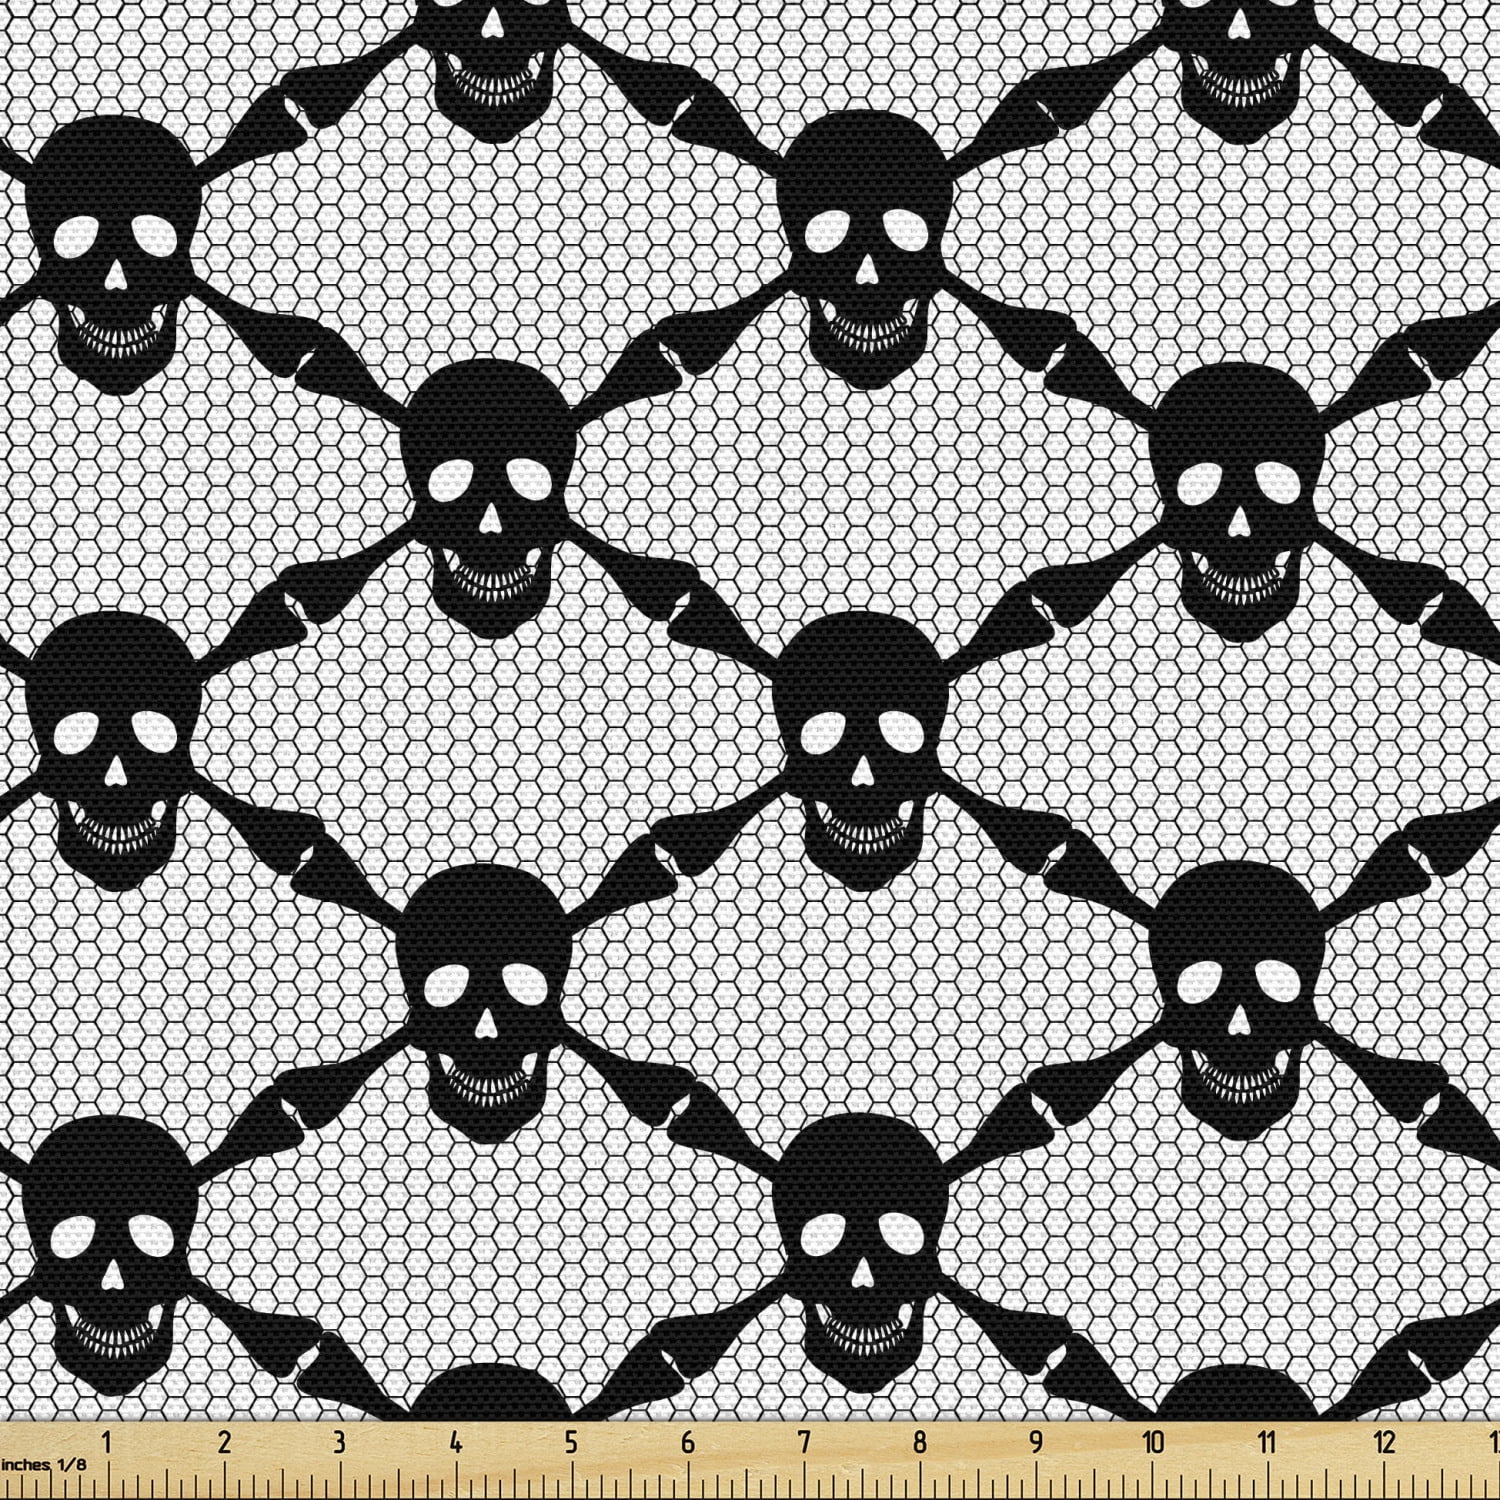 Halloween Mini Tossed Skulls & Bones 100% Cotton Fabric Select Your Size or By The Yard